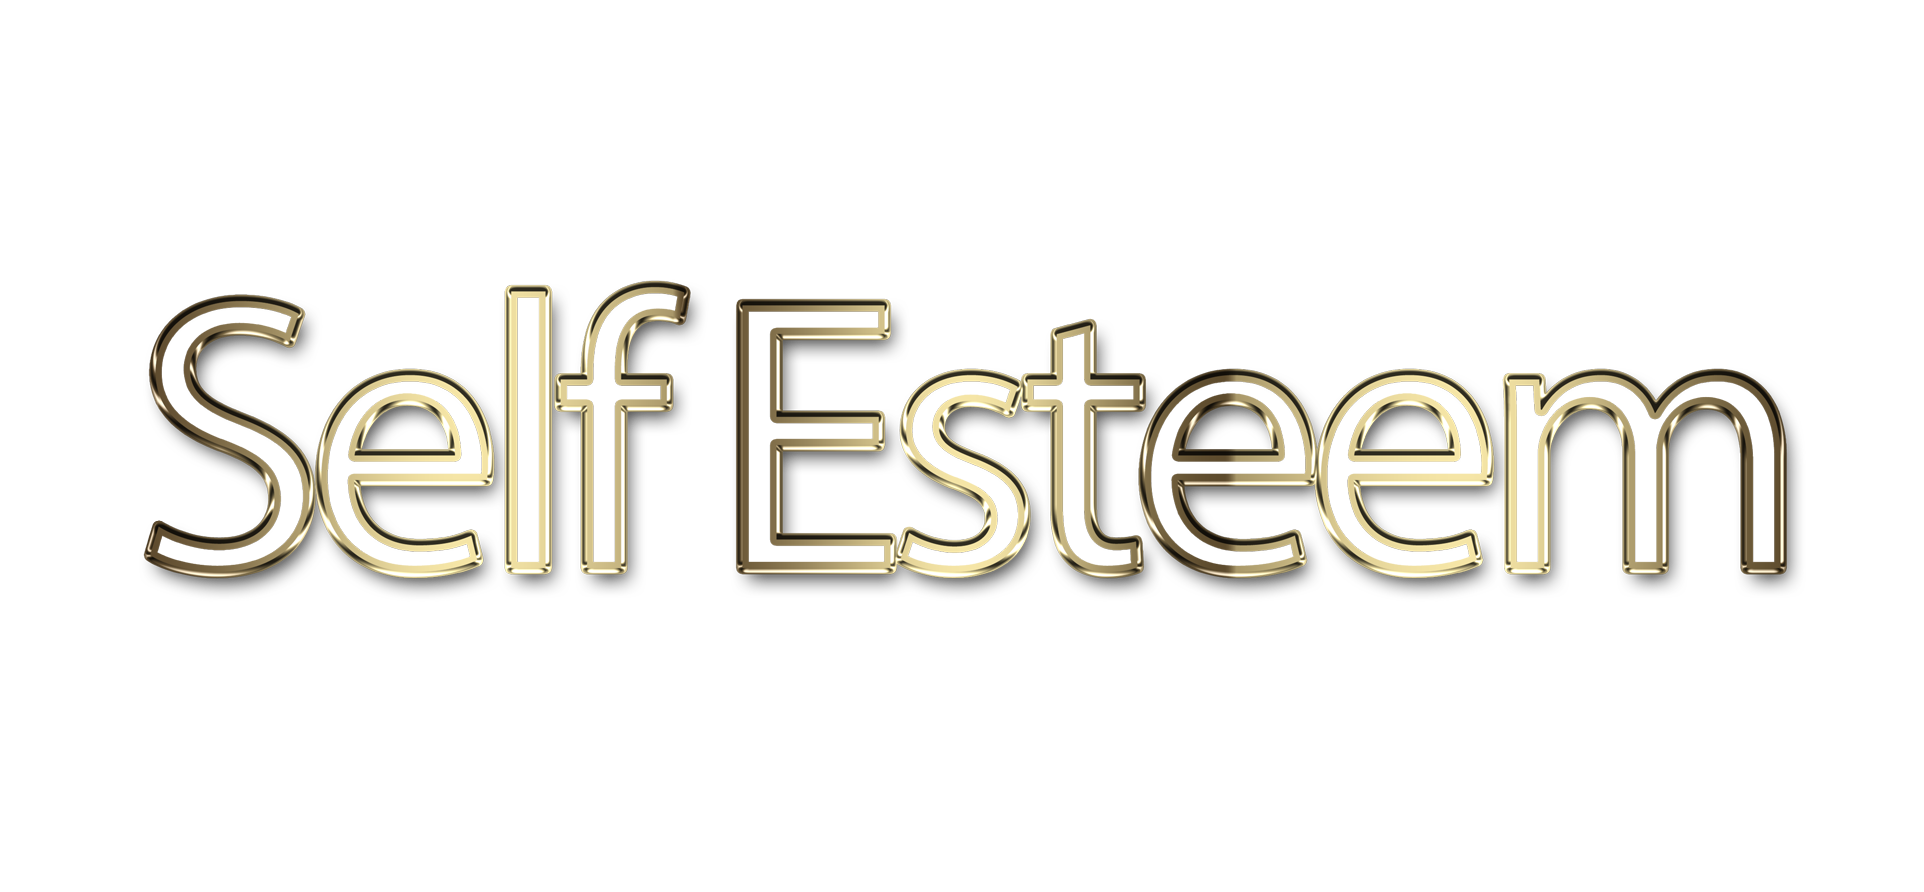 Selfesteem png, word Selfesteem png, Selfesteem word png, Selfesteem text png, Selfesteem letters png, Selfesteem word art typography PNG images, transparent png